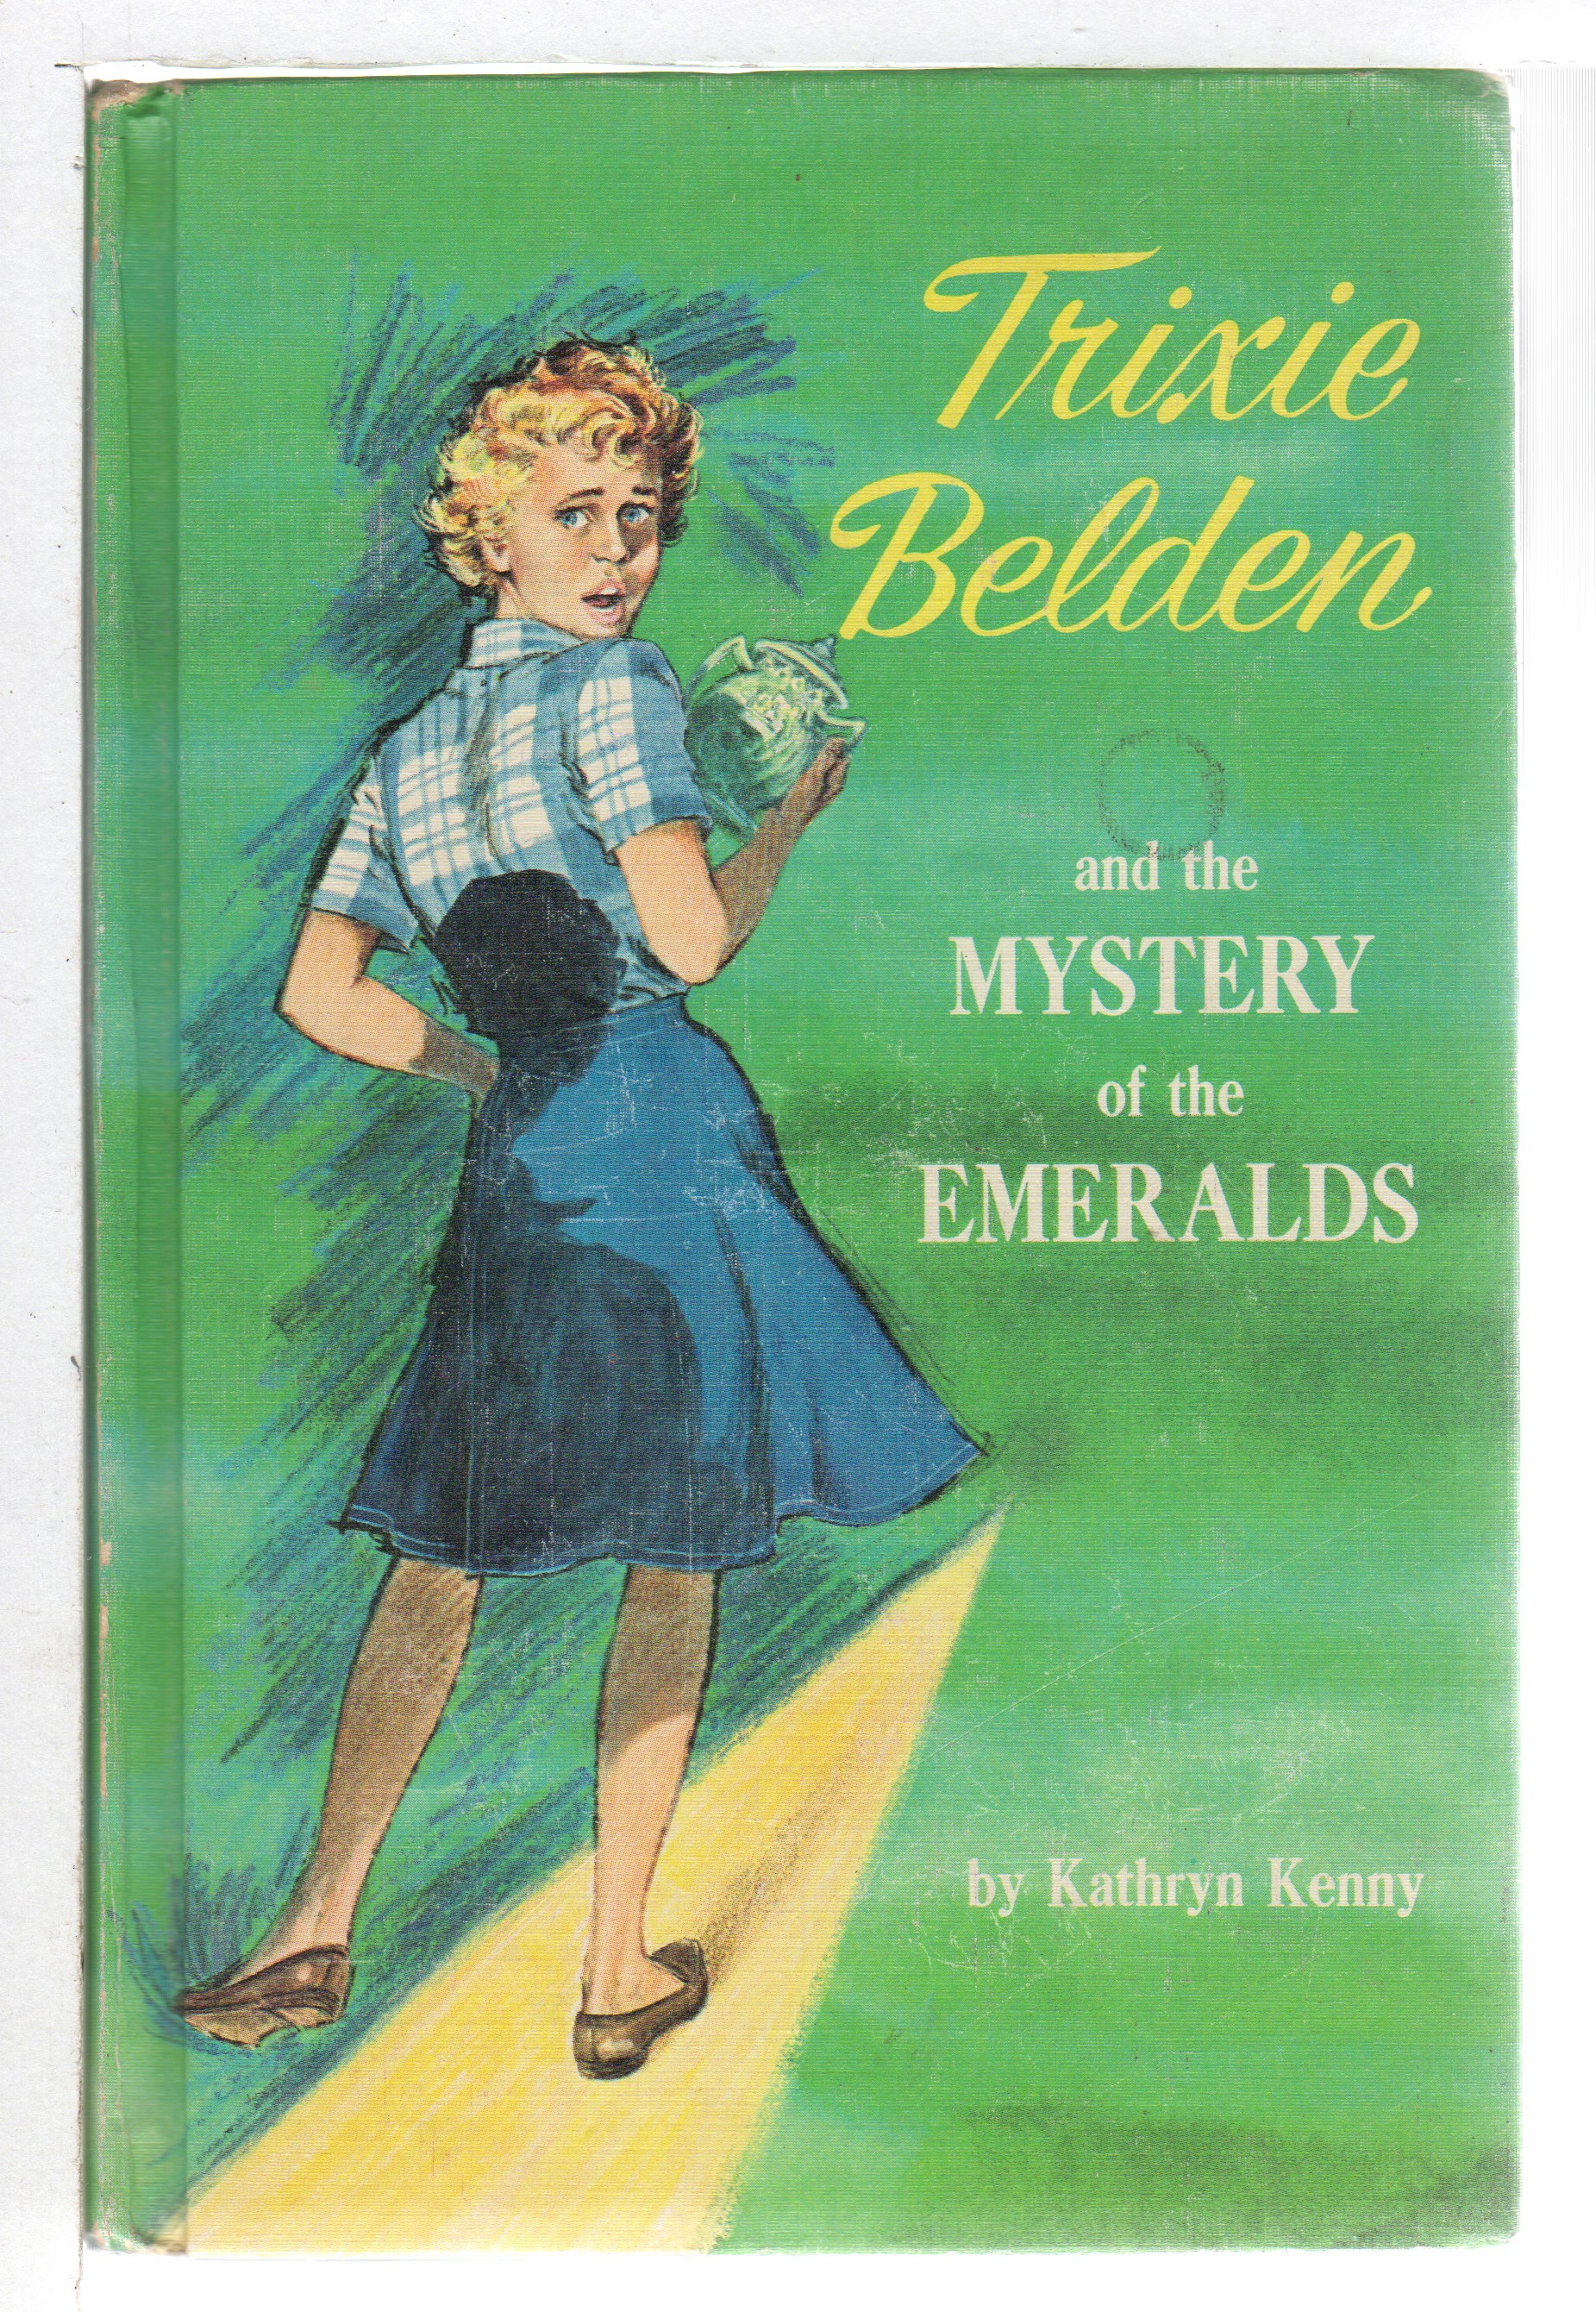 1:12 SCALE MINIATURE BOOK MYSTERY OFF GLEN ROAD TRIXIE BELDEN ILLUSTRATED 